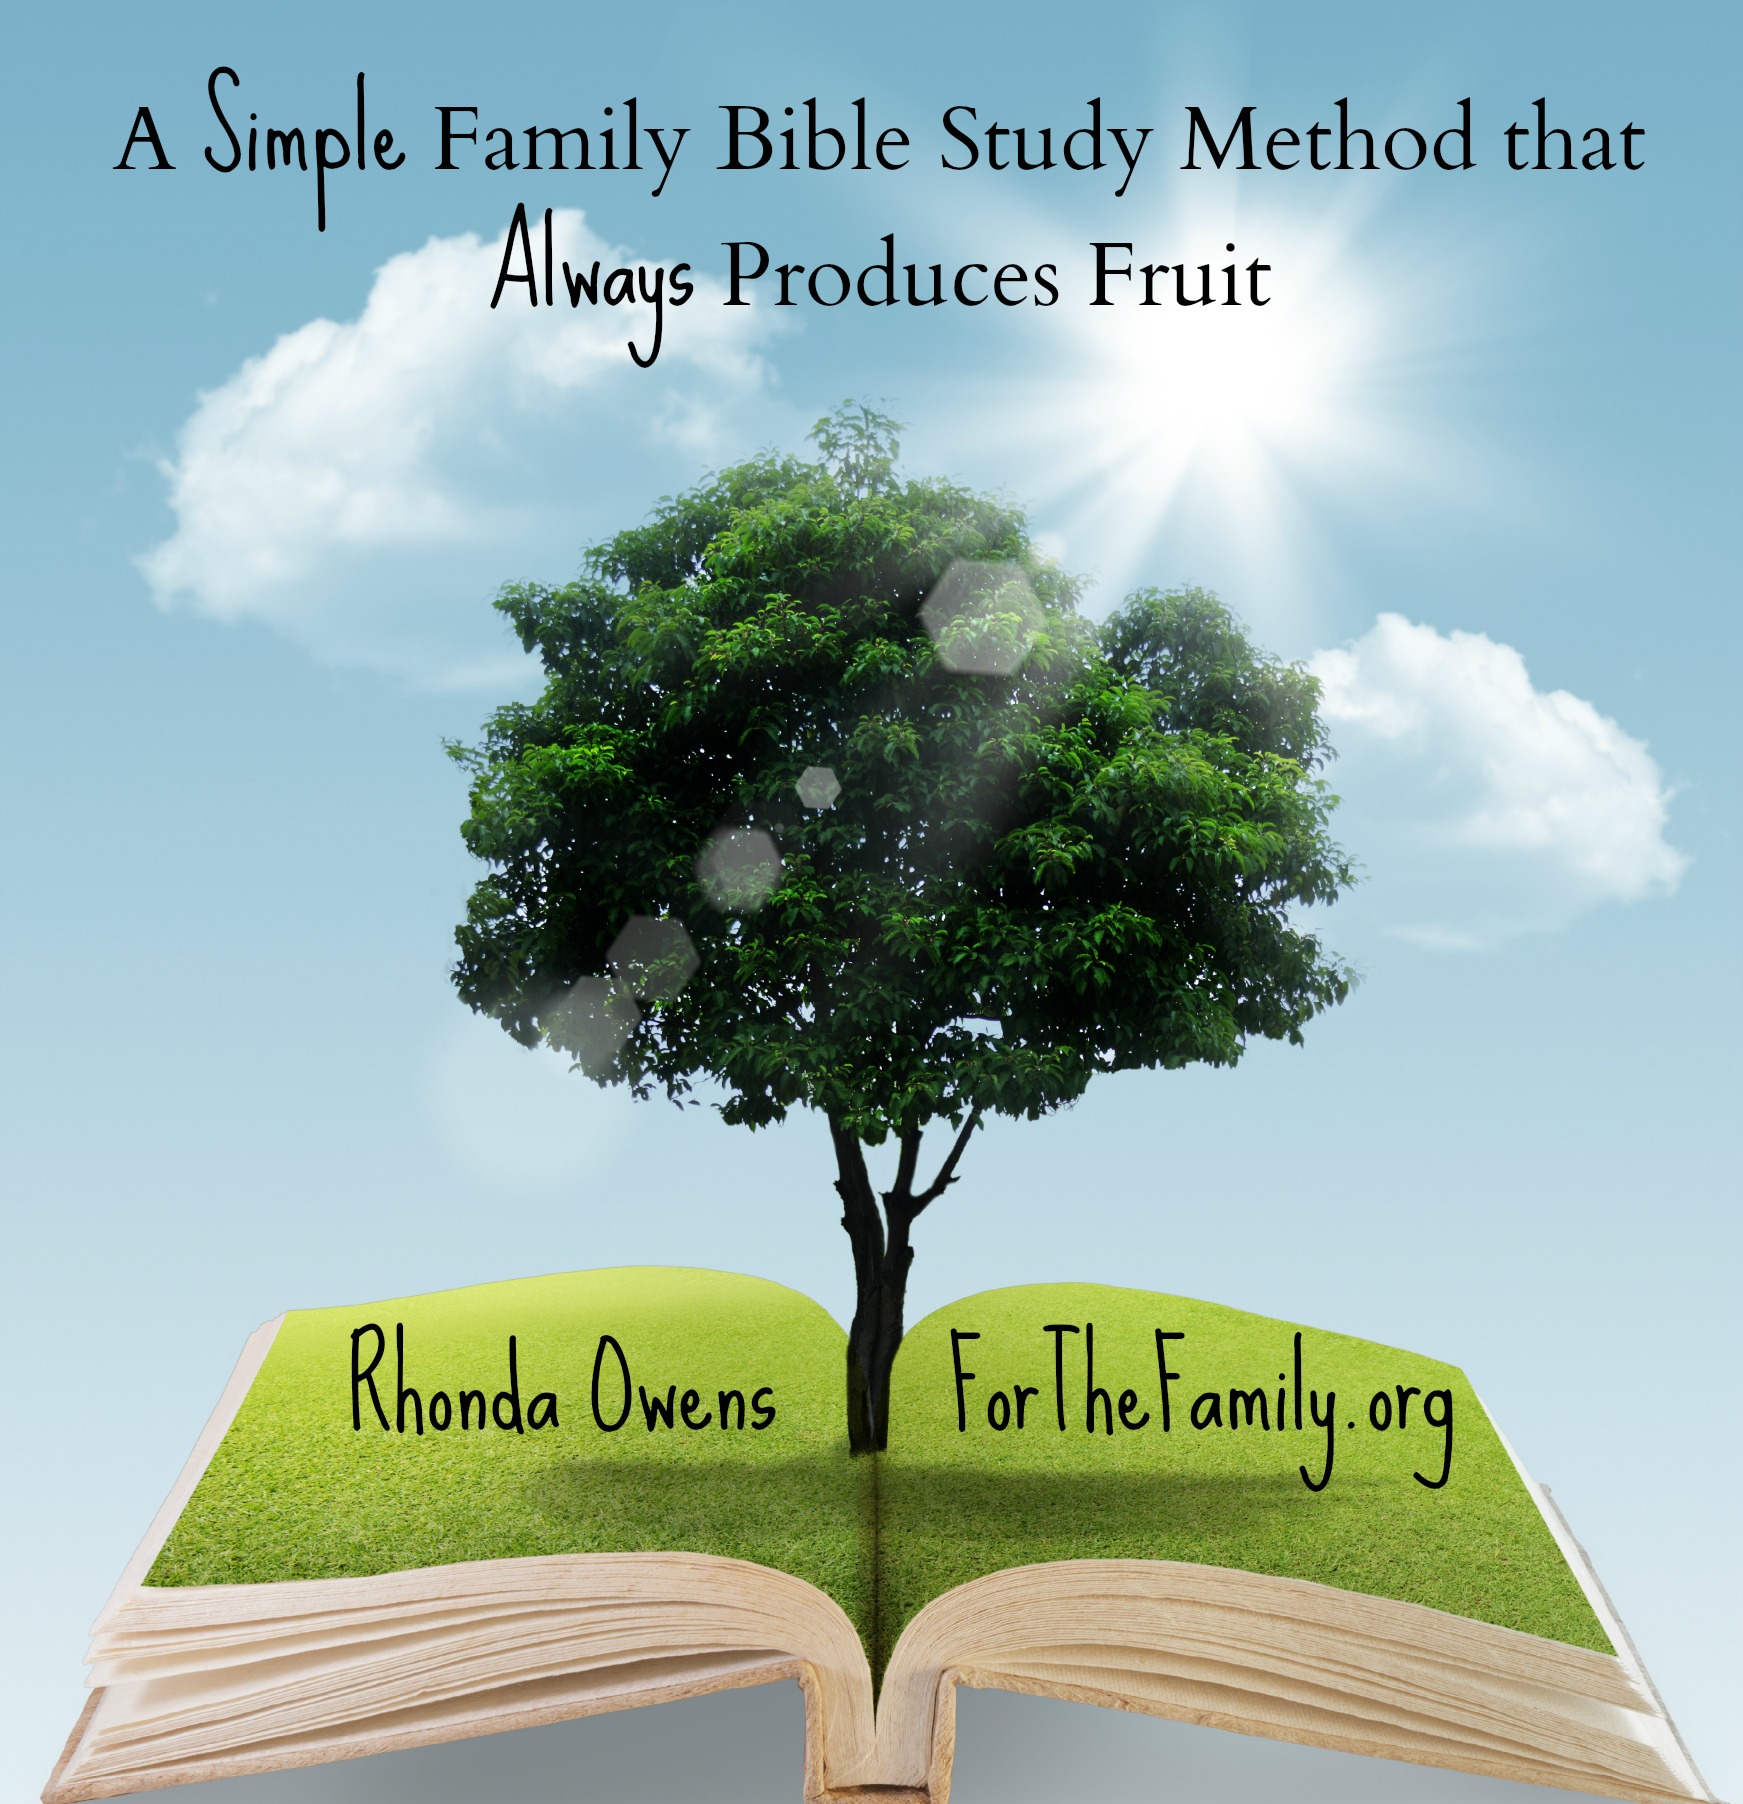 A Simple Family Bible Study Method that Always Produces Fruit